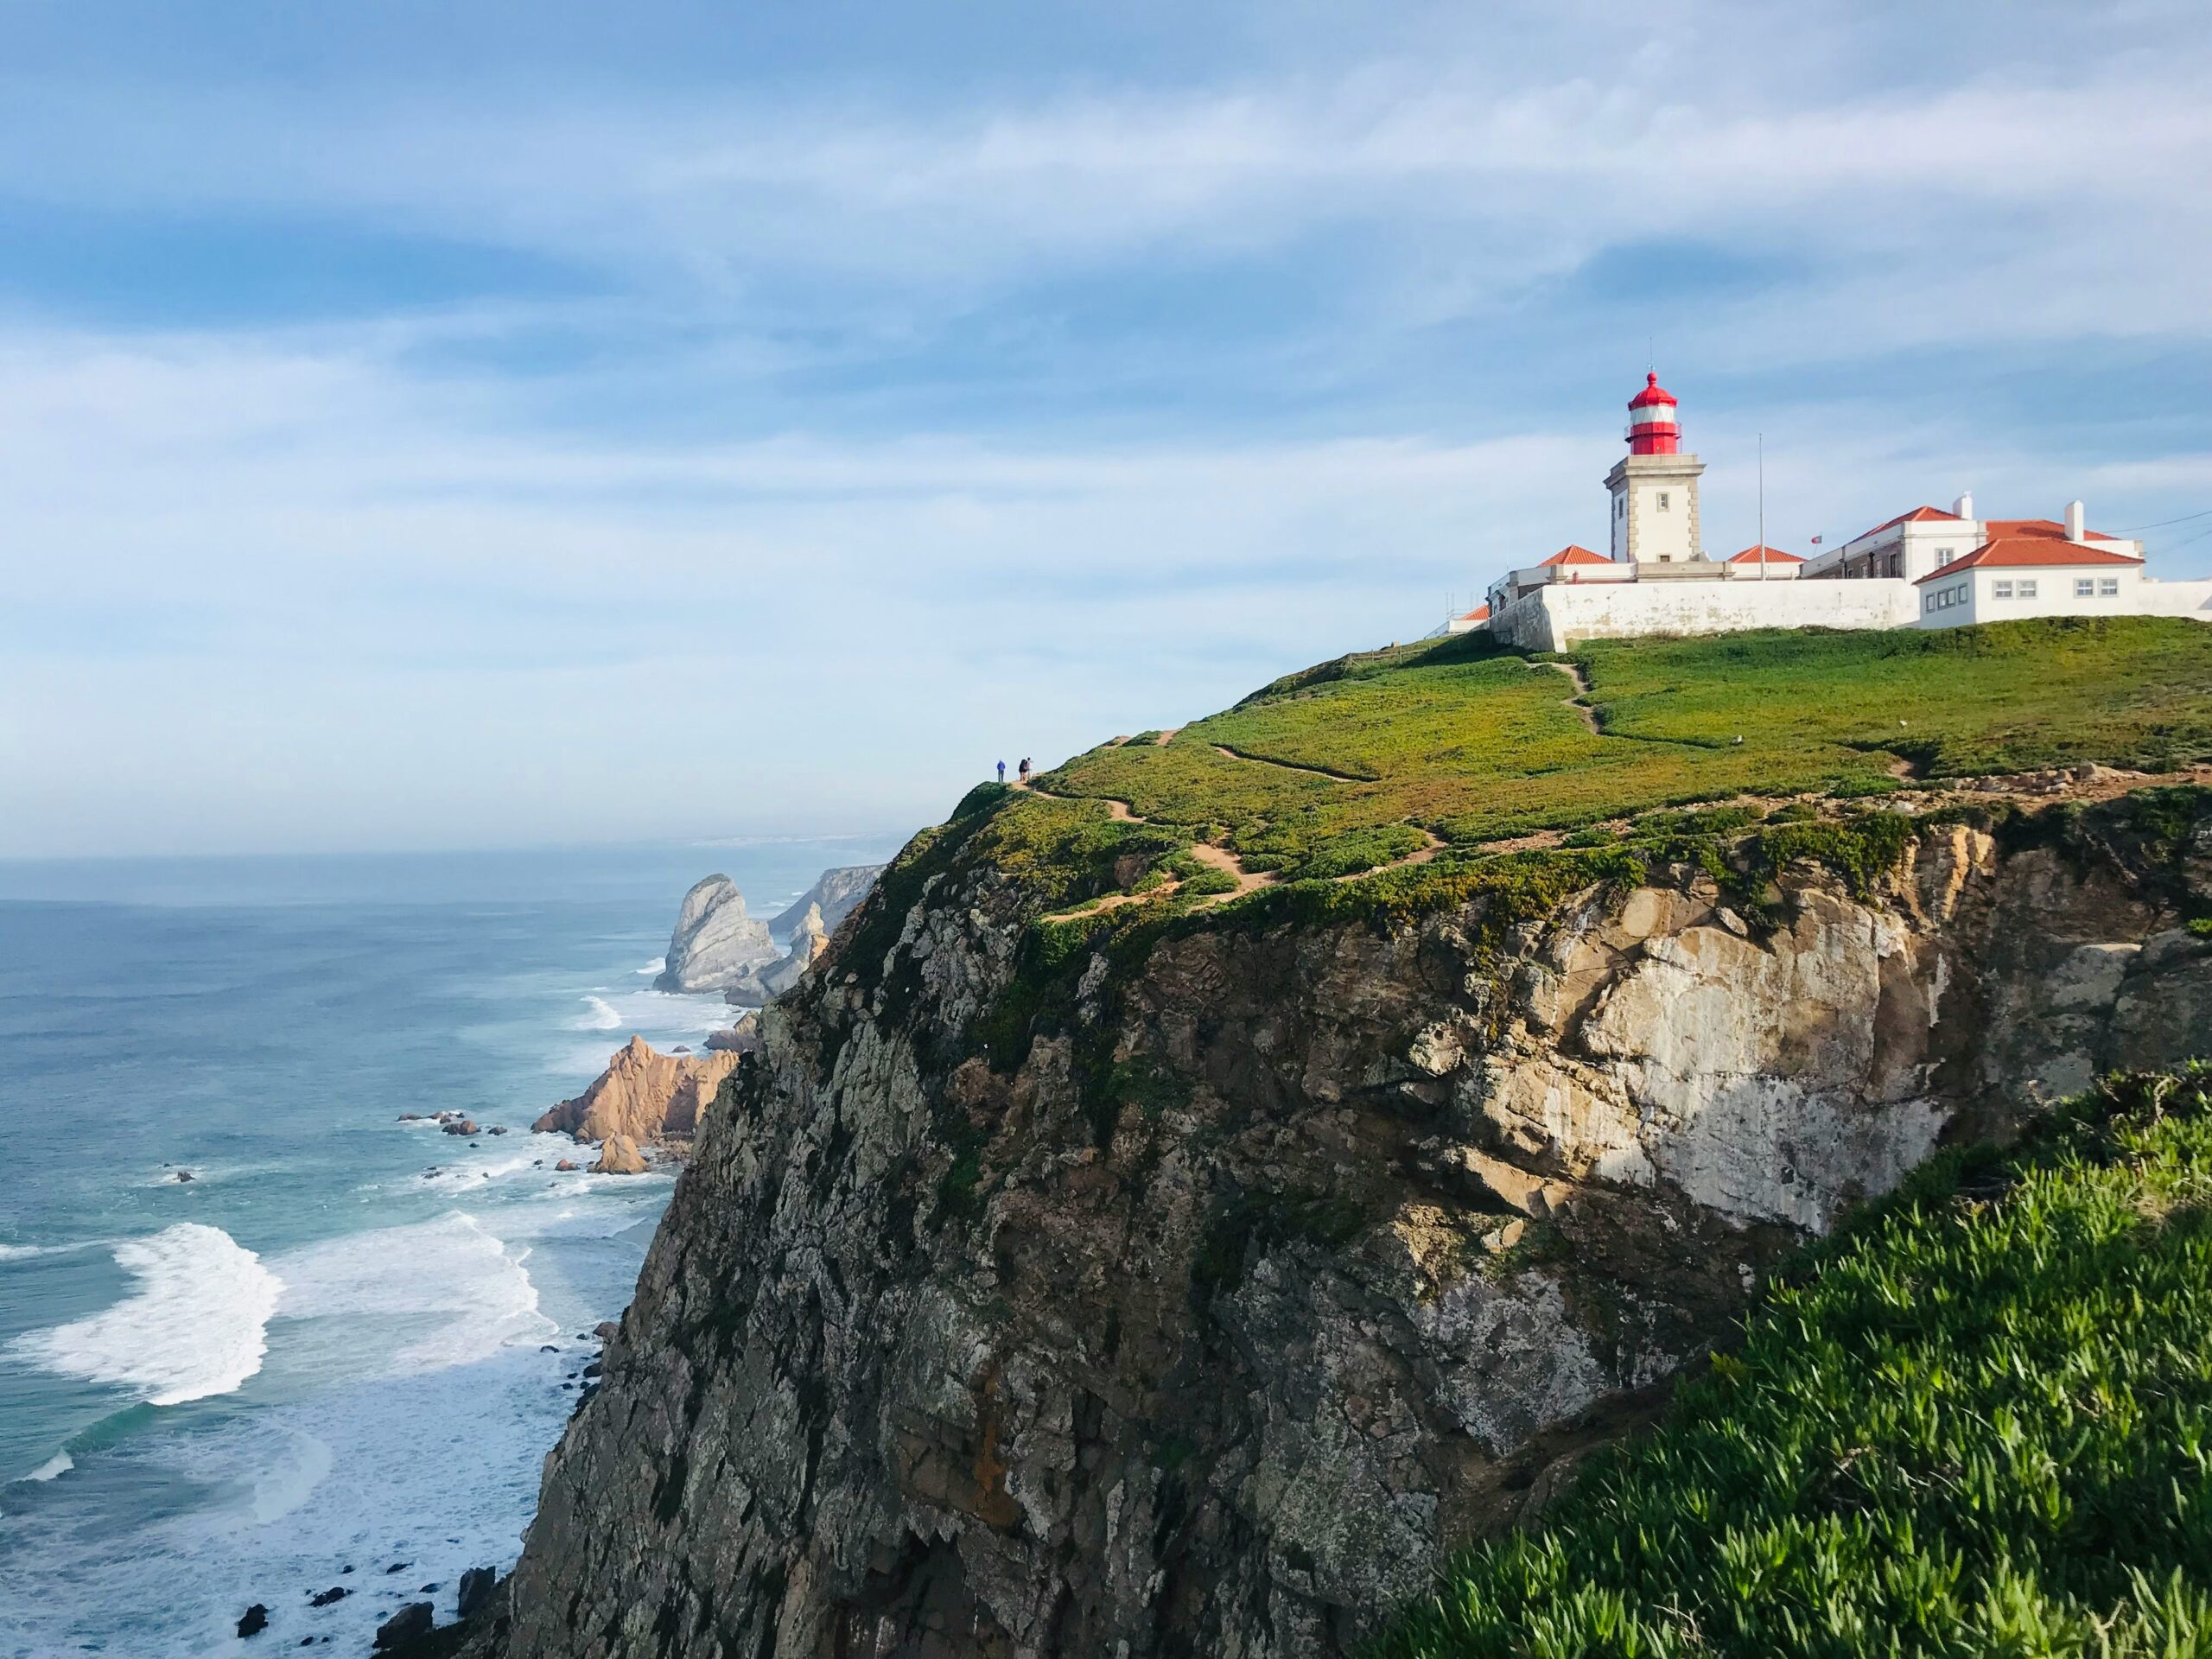 A red and white lighthouse stands on the cliffs overlooking the sea at Cabo da Roca near Sintra and Lisbon